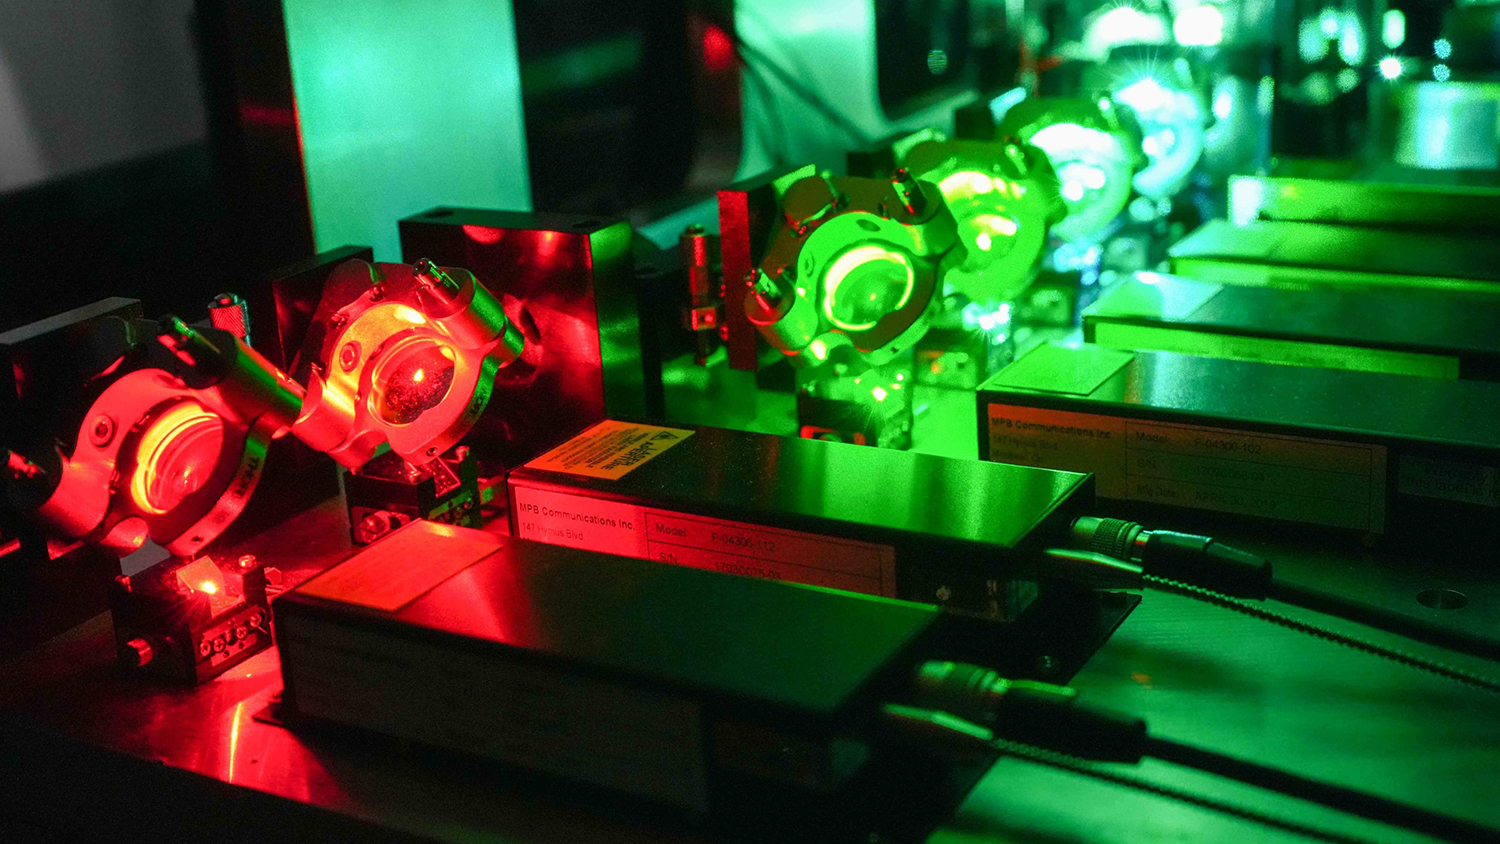 An autonomous microscope bathed in red and green light.